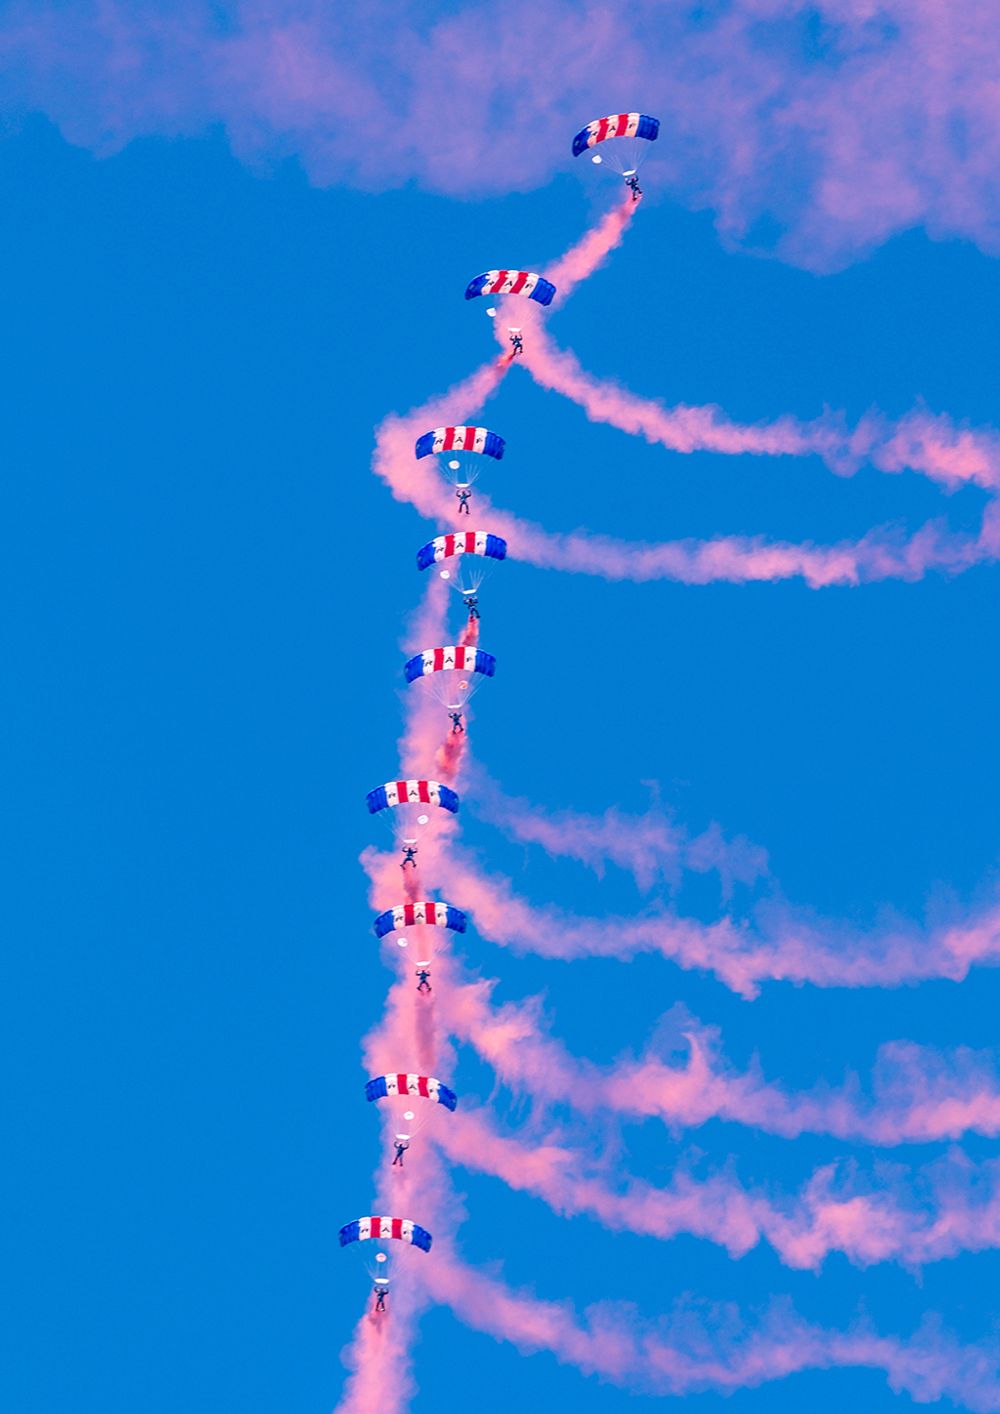 RAF Falcons conducting their famous canopy stack during their UK Winter Training